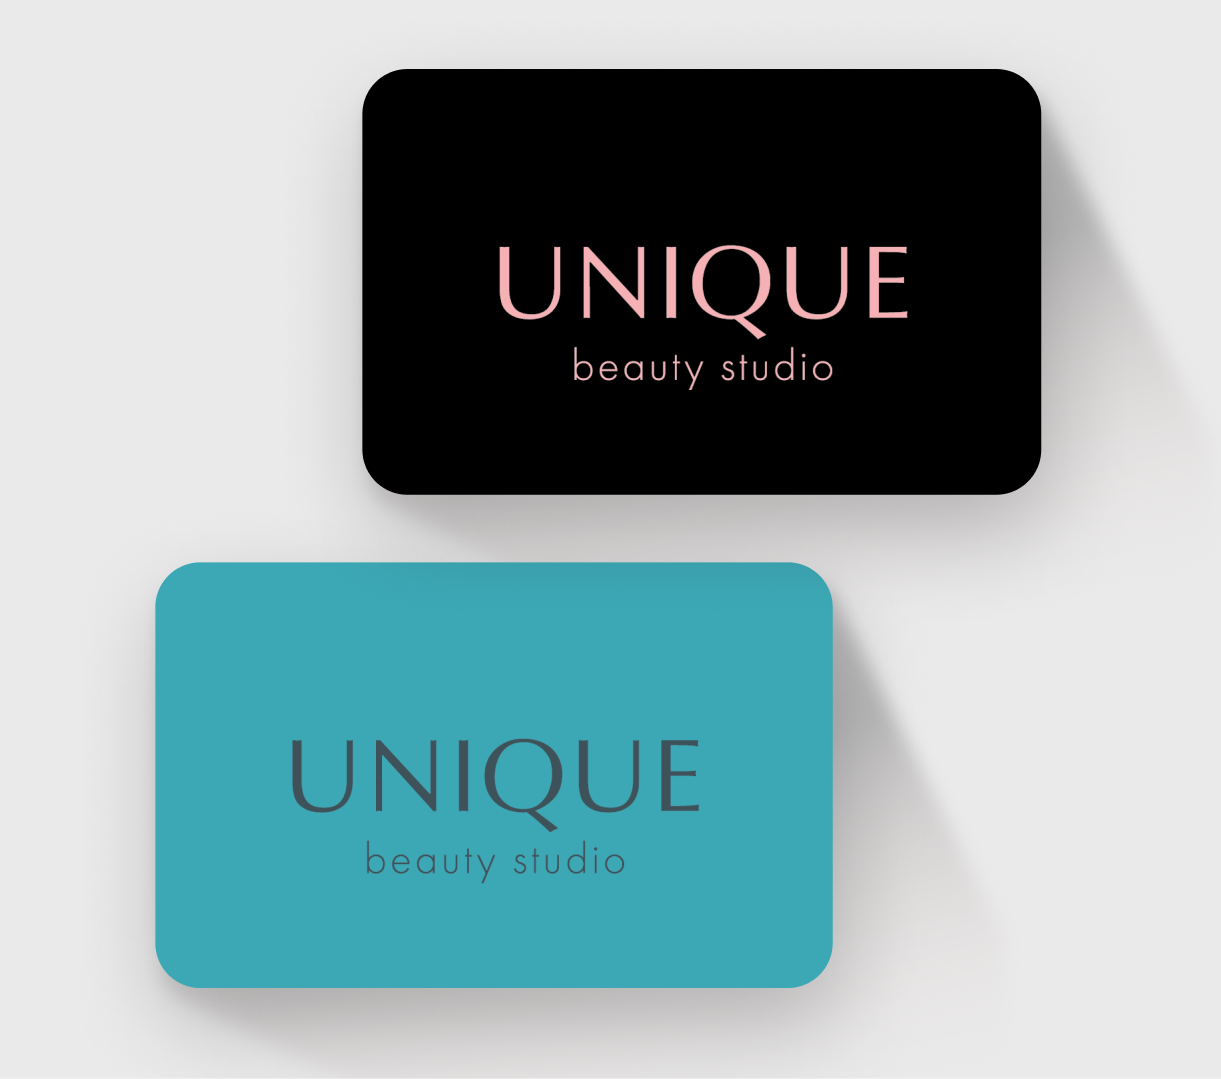 Club RFID cards with corporate design for beauty salons UNIQUE